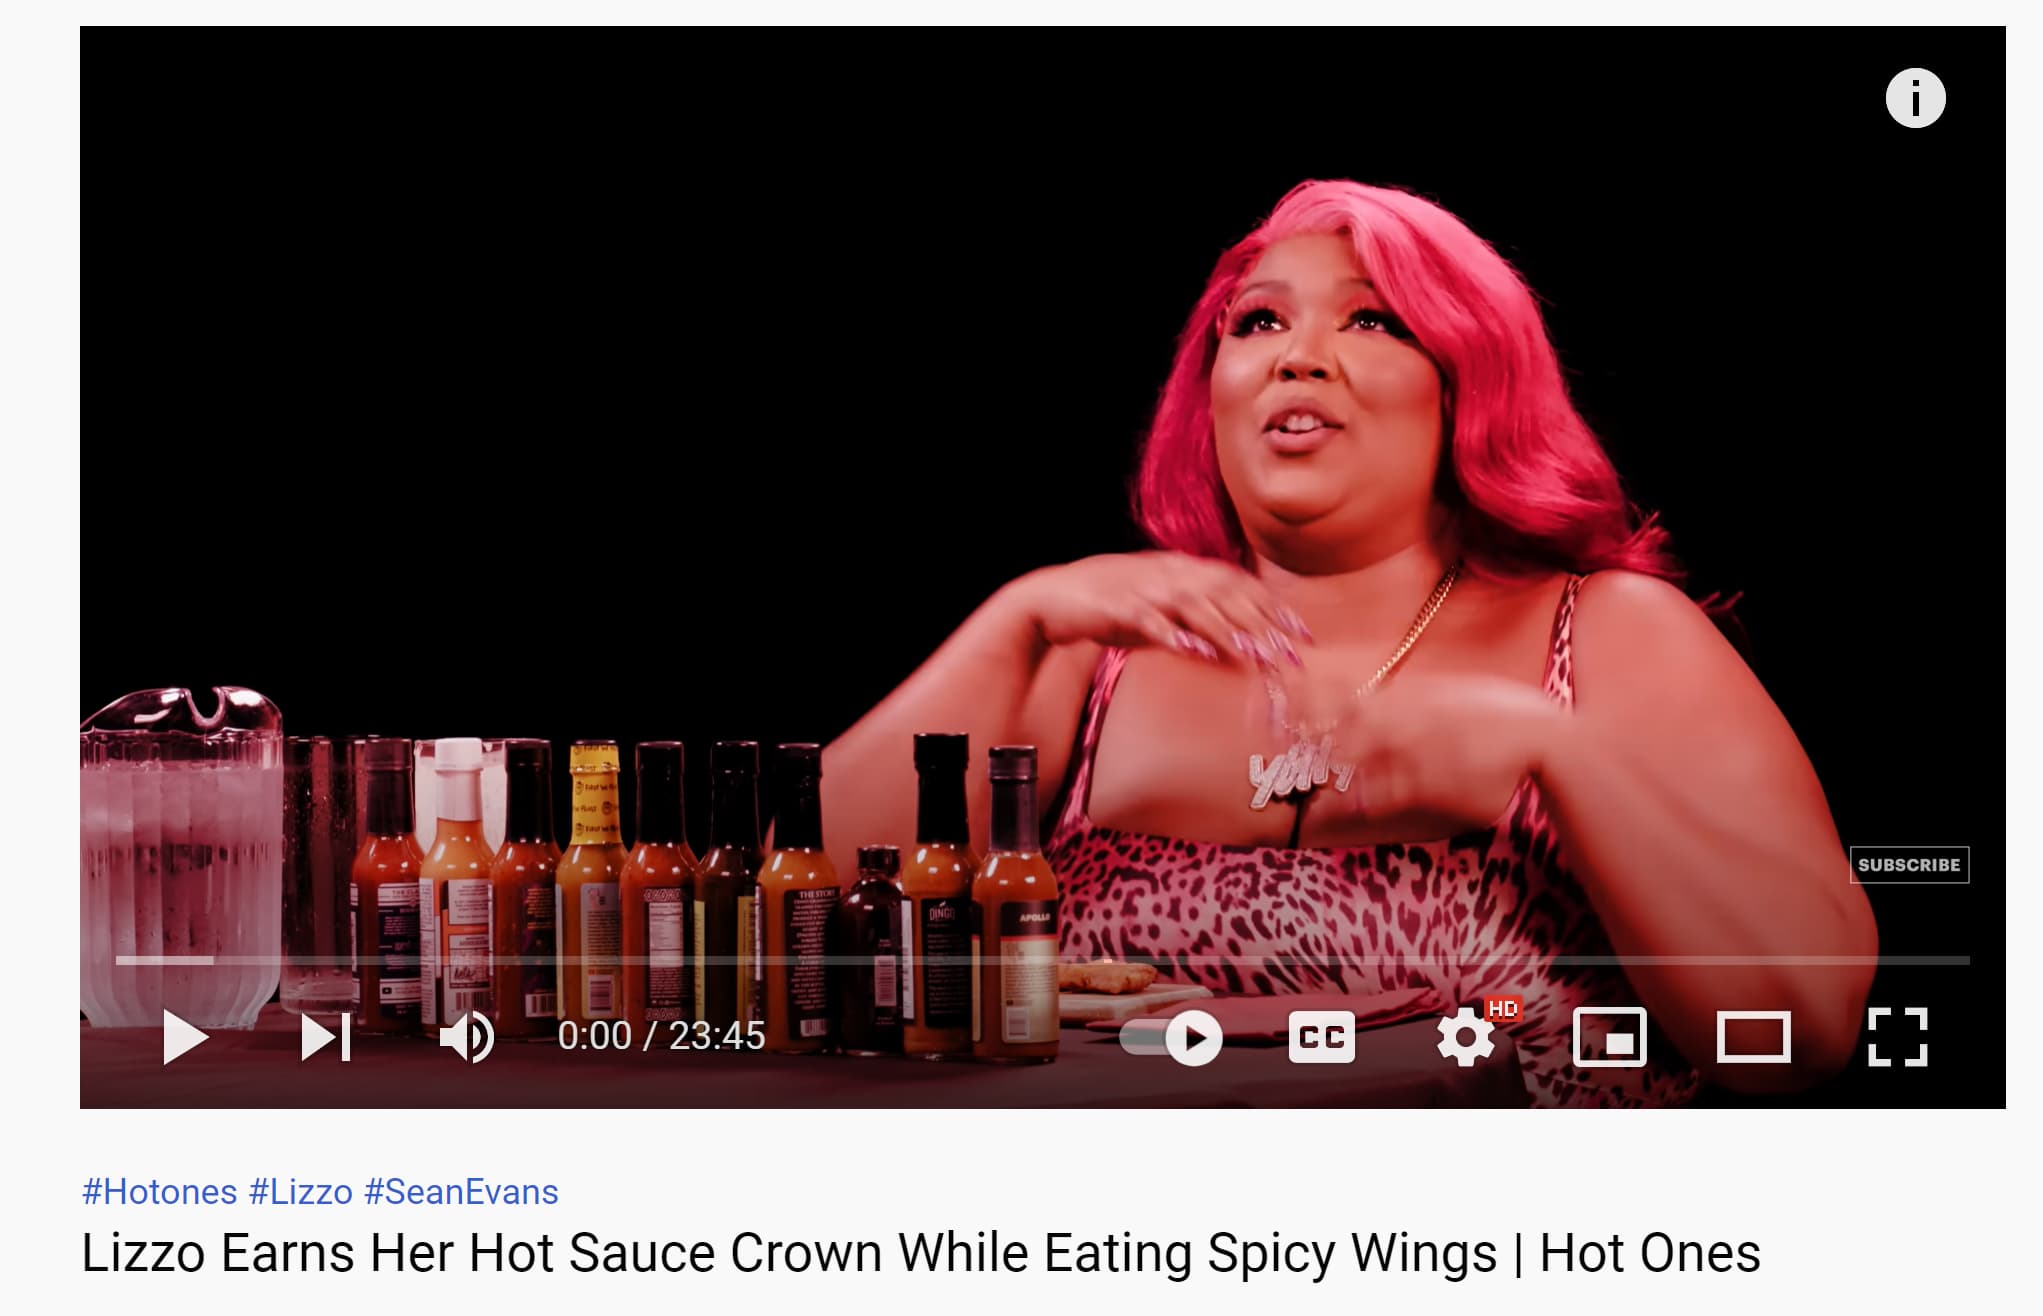 YouTube hashtags are used to promote this YouTube video about singer Lizzo